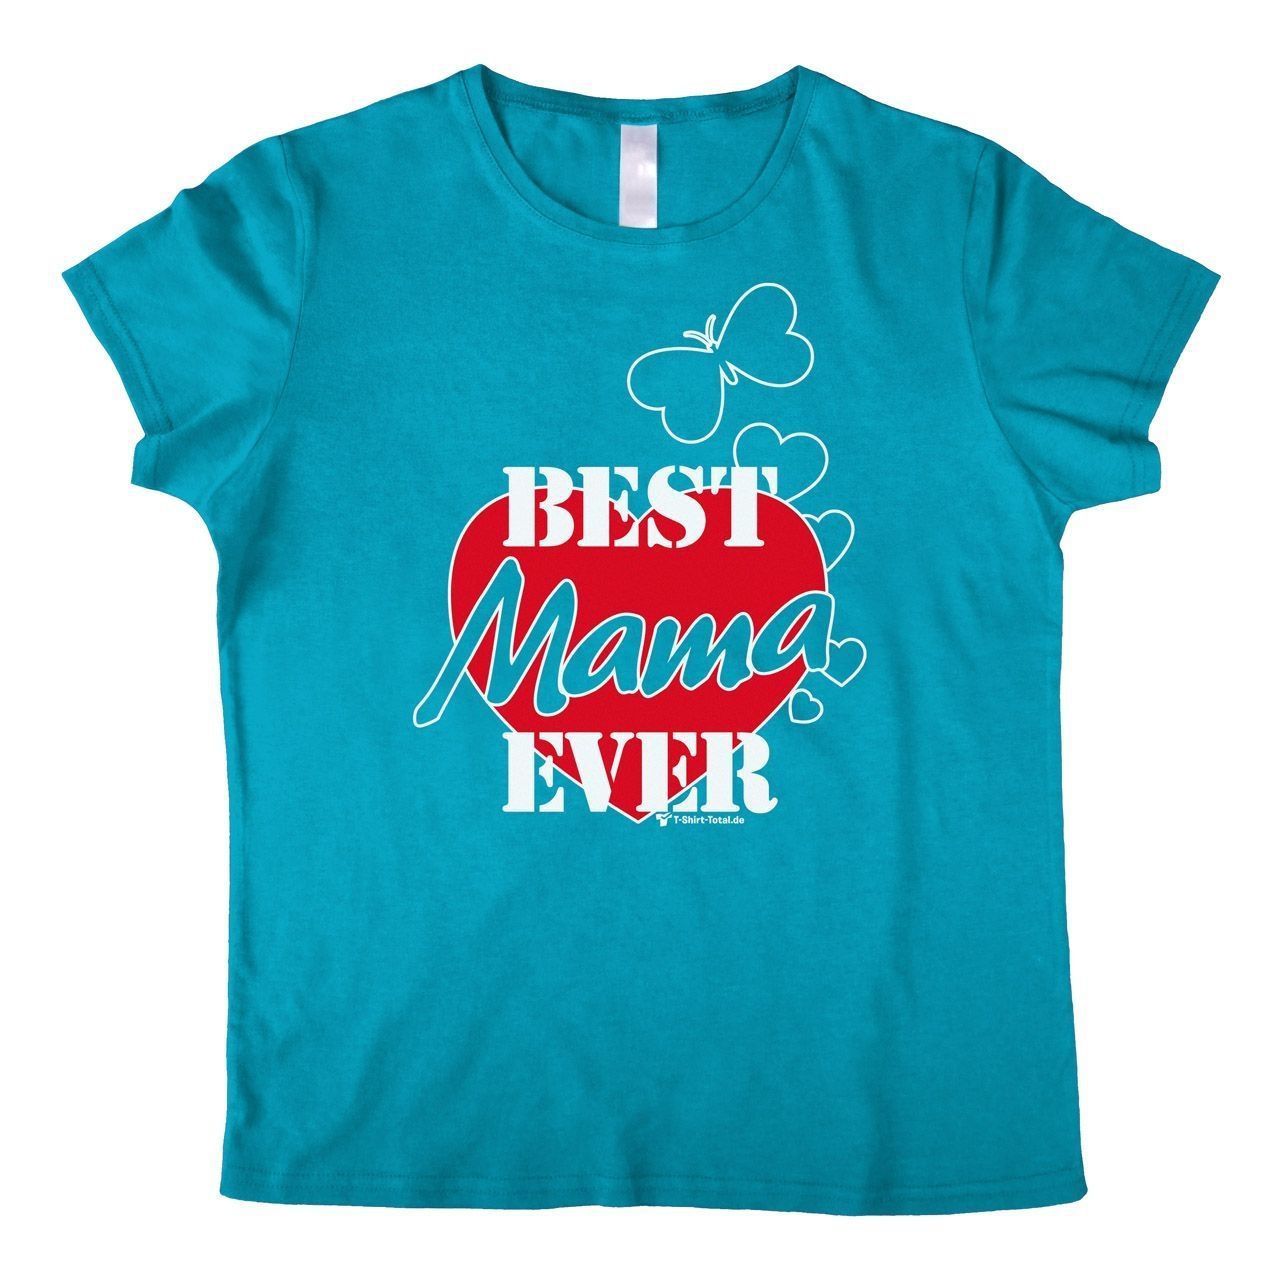 Best Mama ever Woman T-Shirt türkis Extra Large